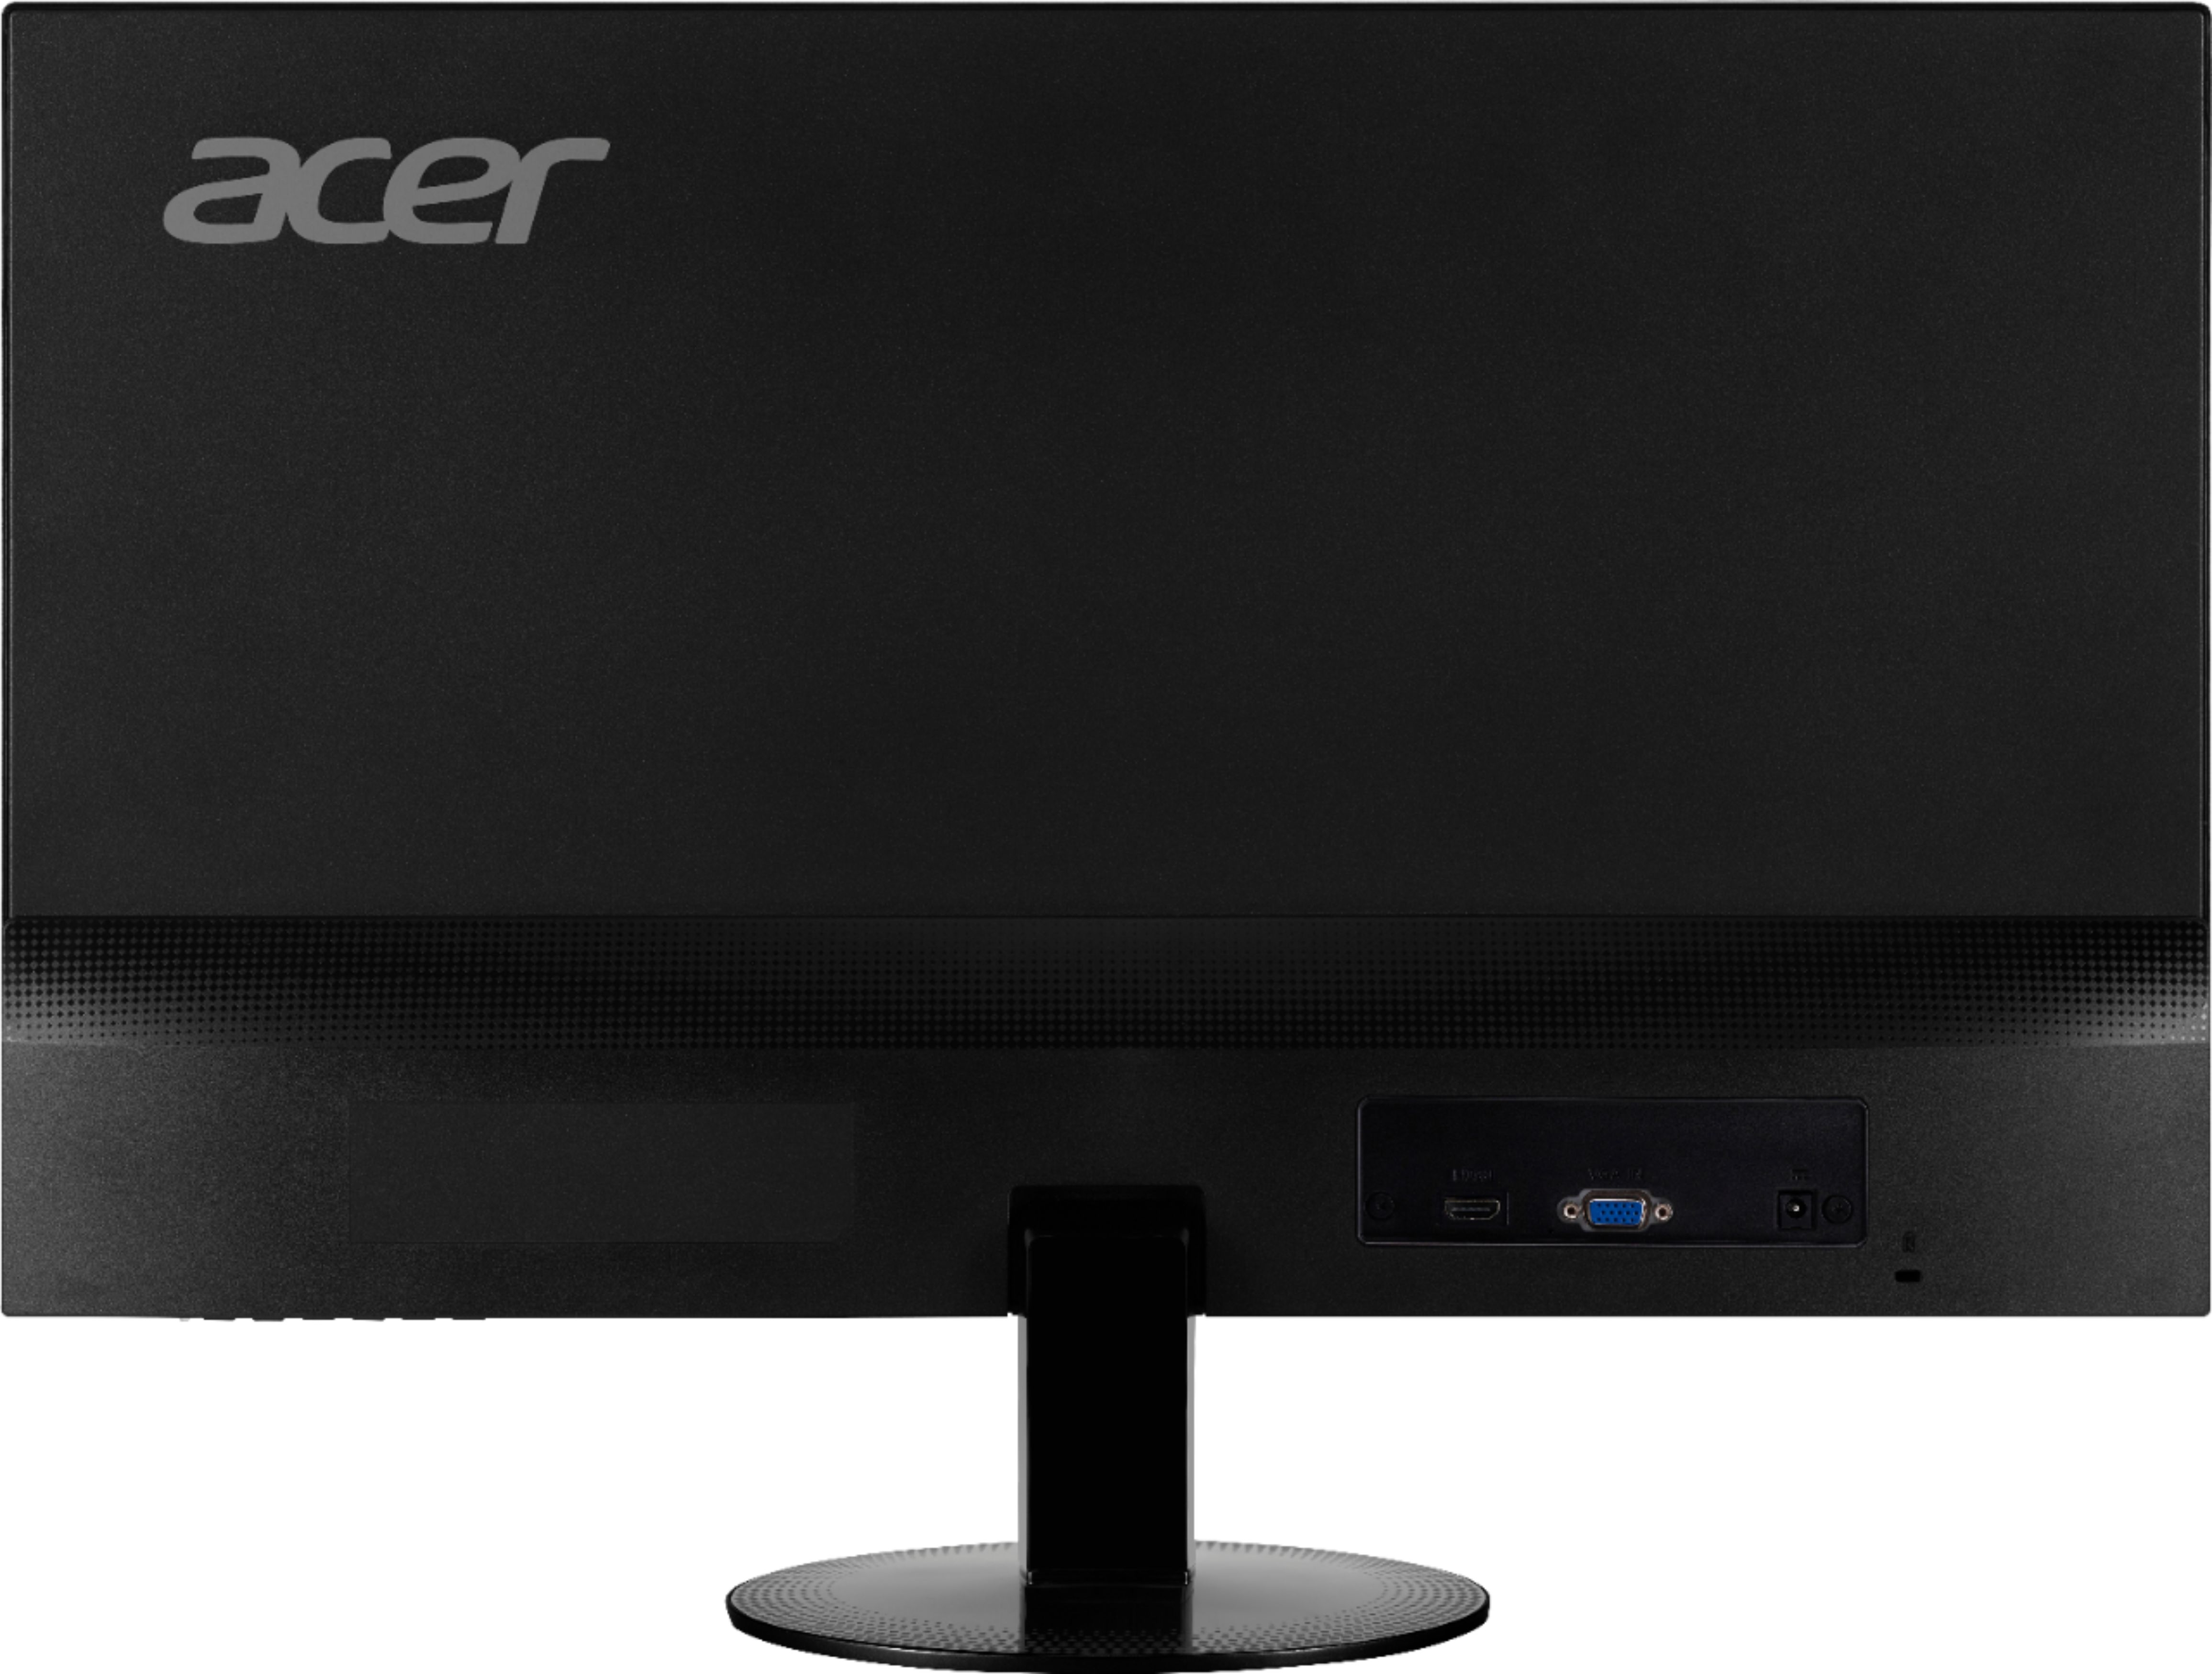 Back View: Acer - 23.8" IPS LED FHD FreeSync Monitor (USB 3.1 Type-C, Display Port & HDMI)